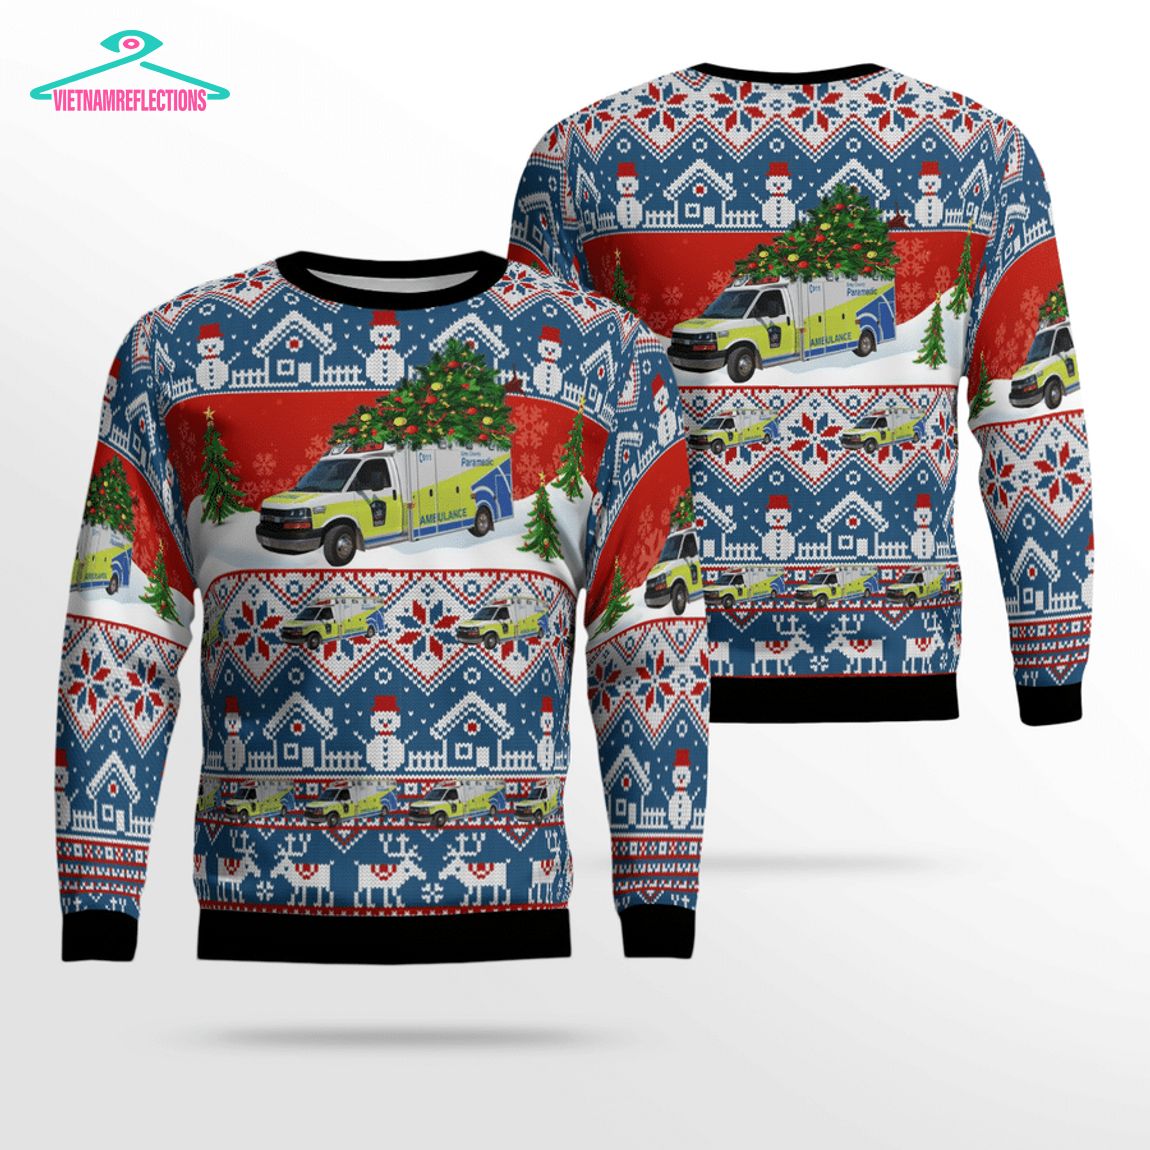 canada-grey-county-paramedic-services-ver-2-3d-christmas-sweater-1-pZG4H.jpg